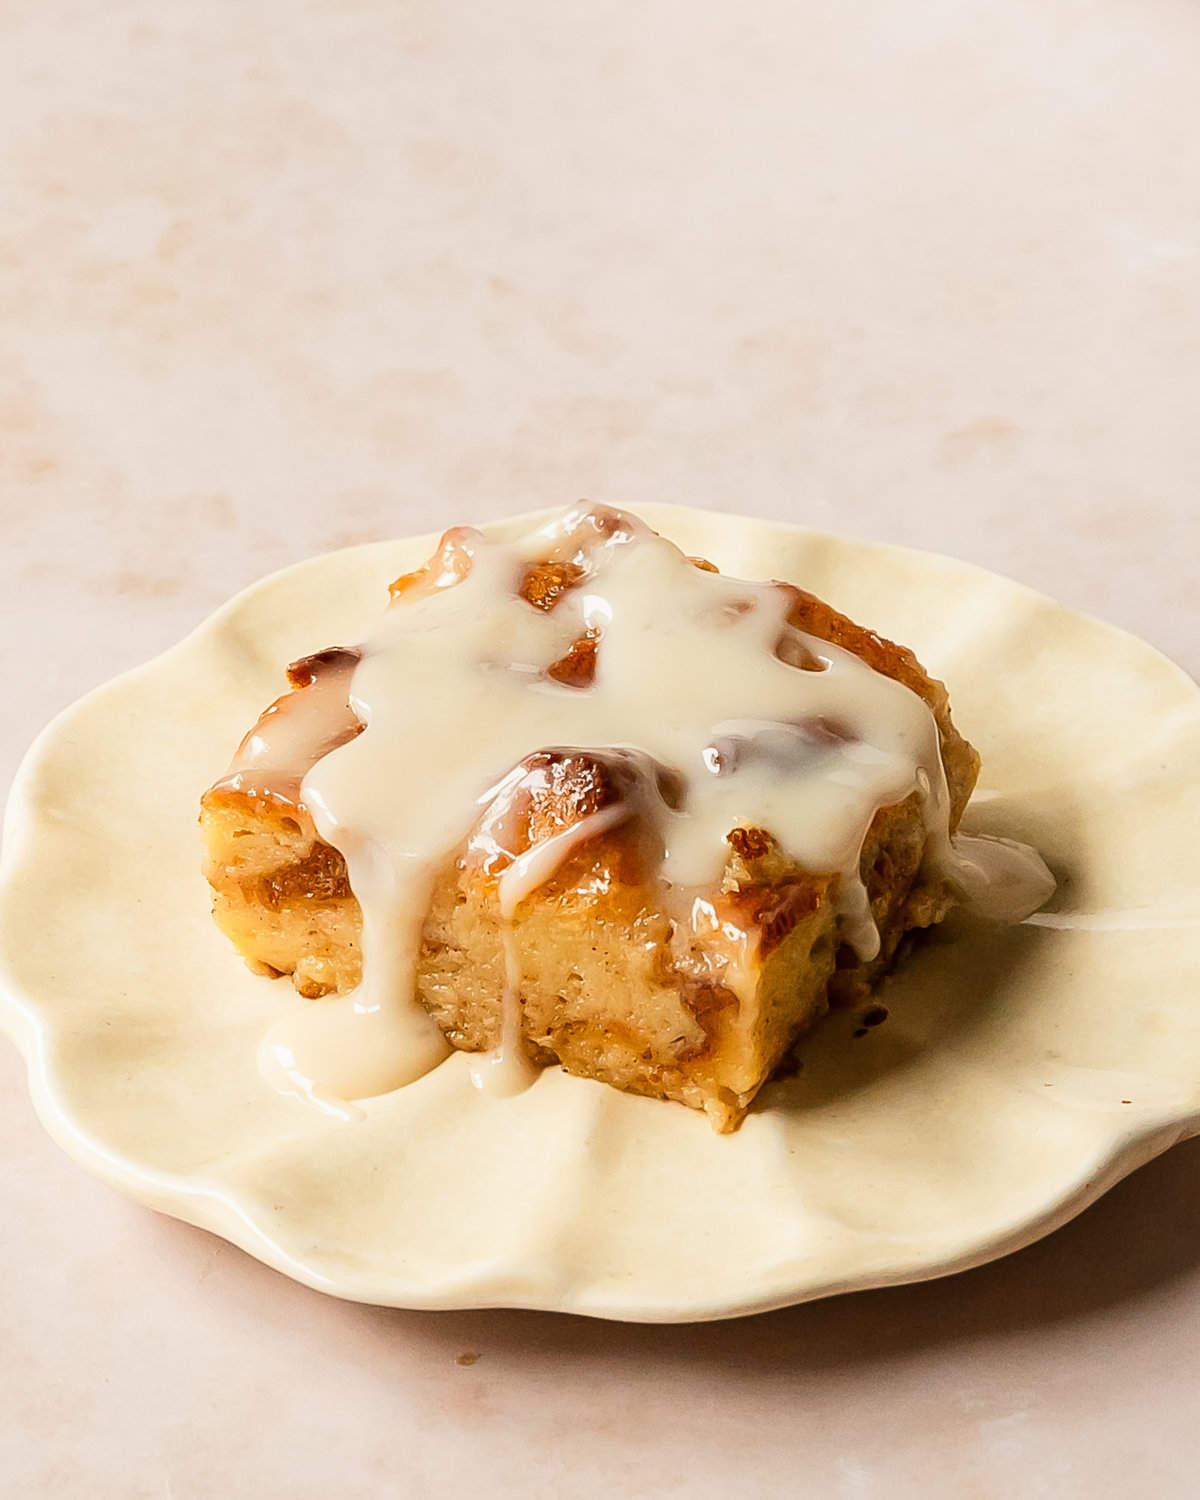 Bread pudding with vanilla sauce is a rich, baked custard and bread dessert, topped with a classic silky vanilla butter sauce right before serving. This quick and easy bread pudding makes the perfect weekend treat or a special holiday breakfast or dessert.